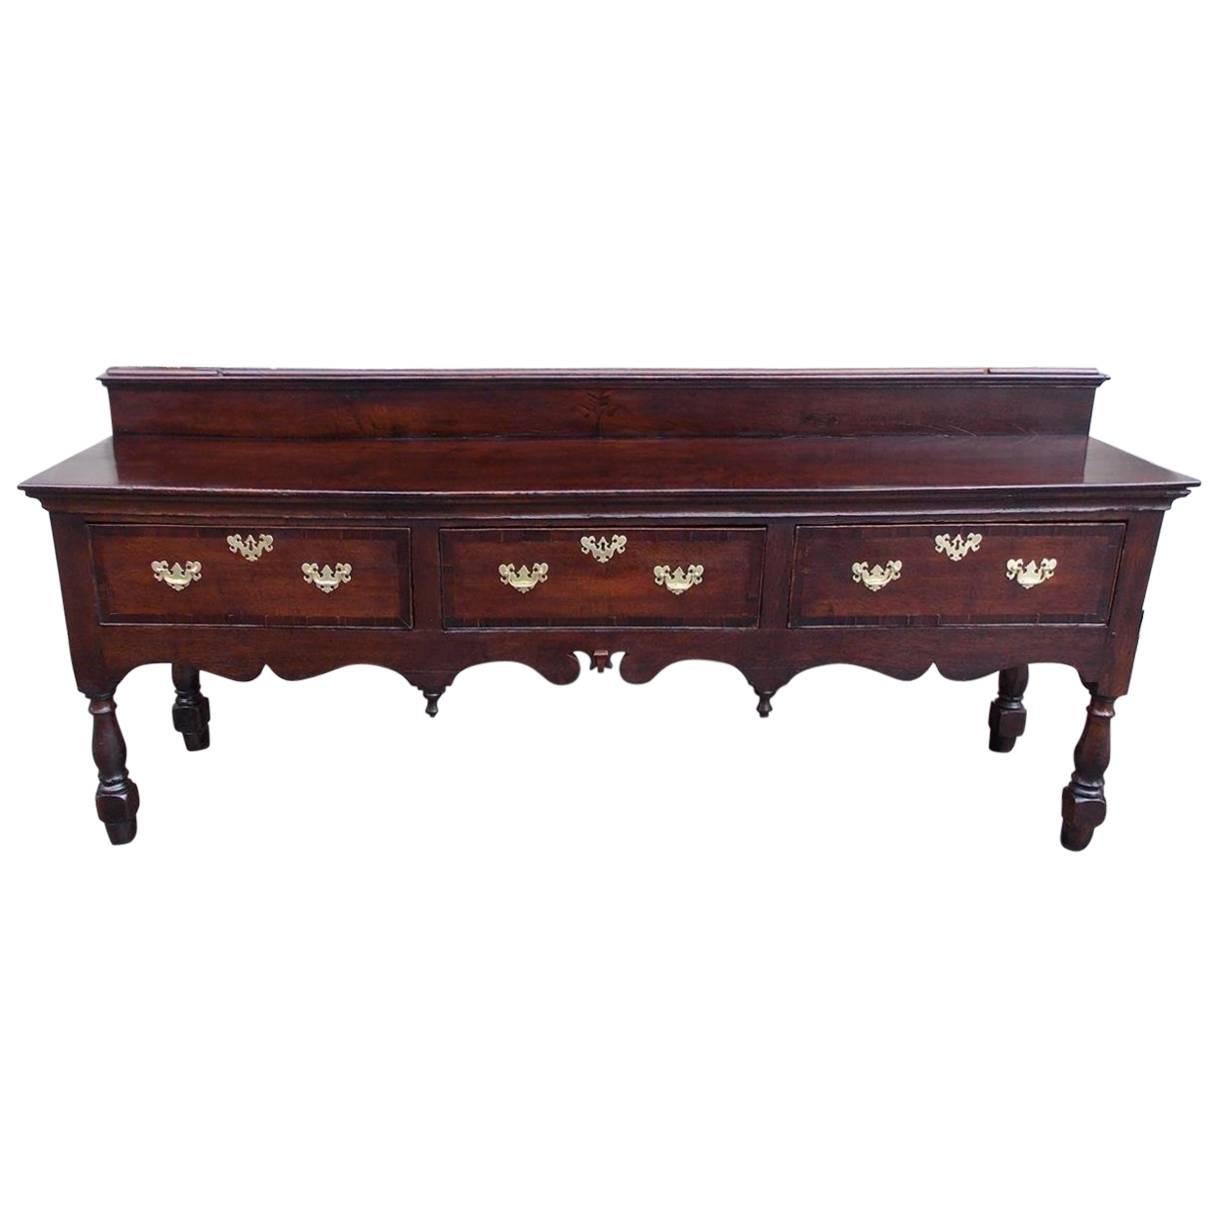 English Oak Three-Drawer Floral Inlaid Scalloped Console, Circa 1770 For Sale